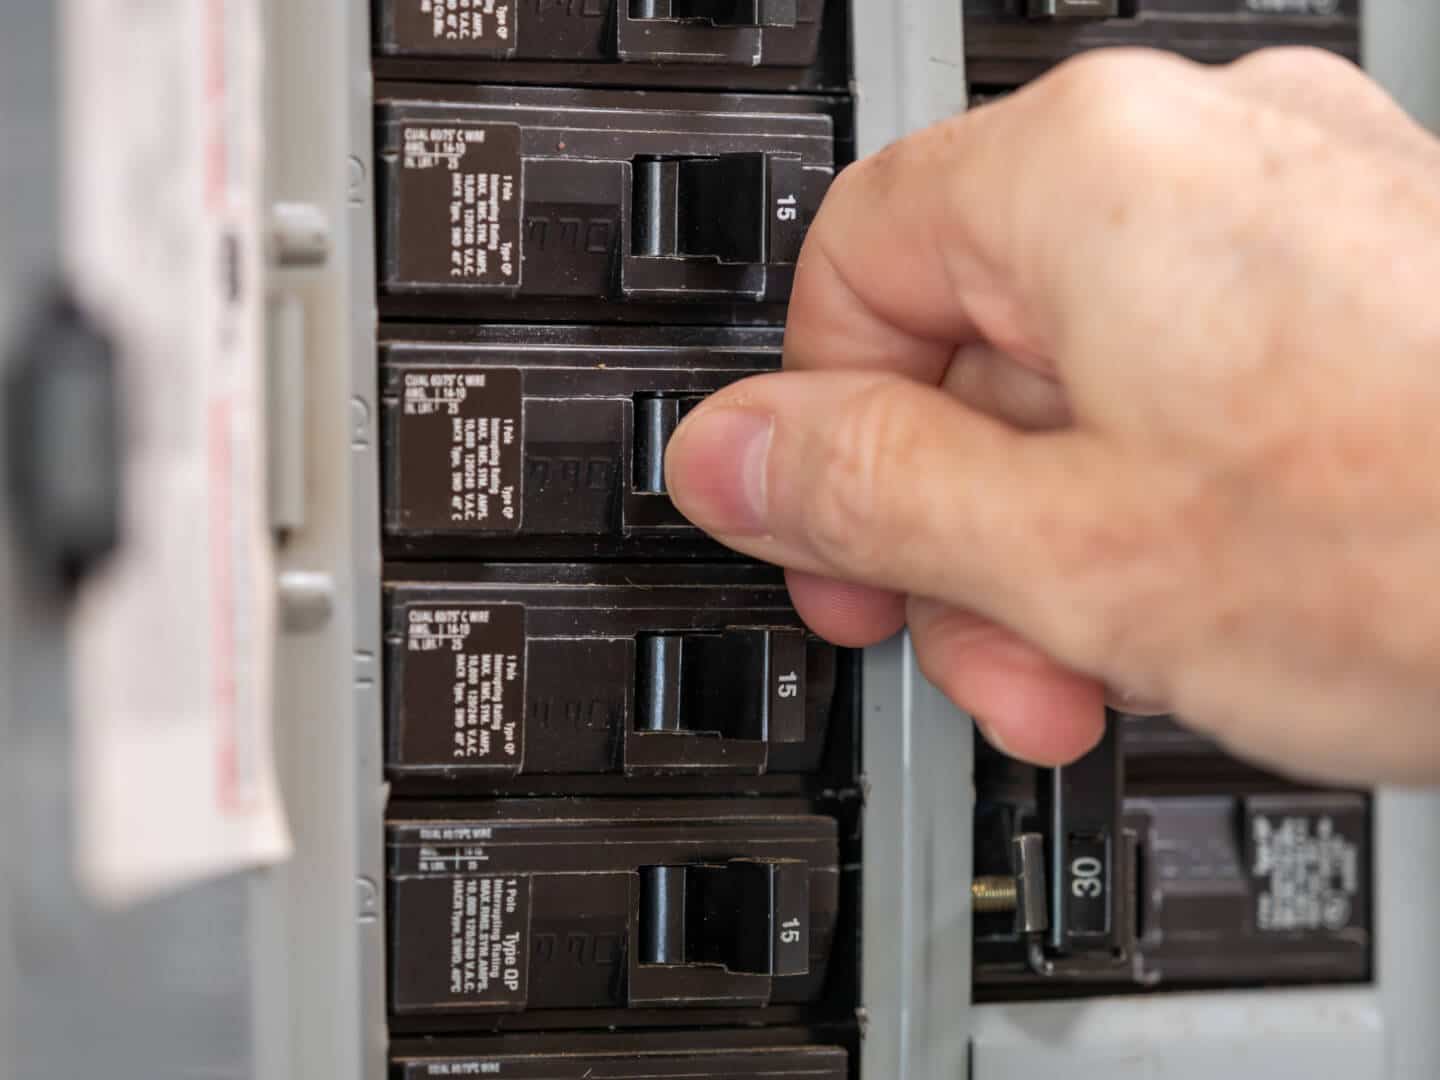 Electrical outlet at circuit breaker box Image